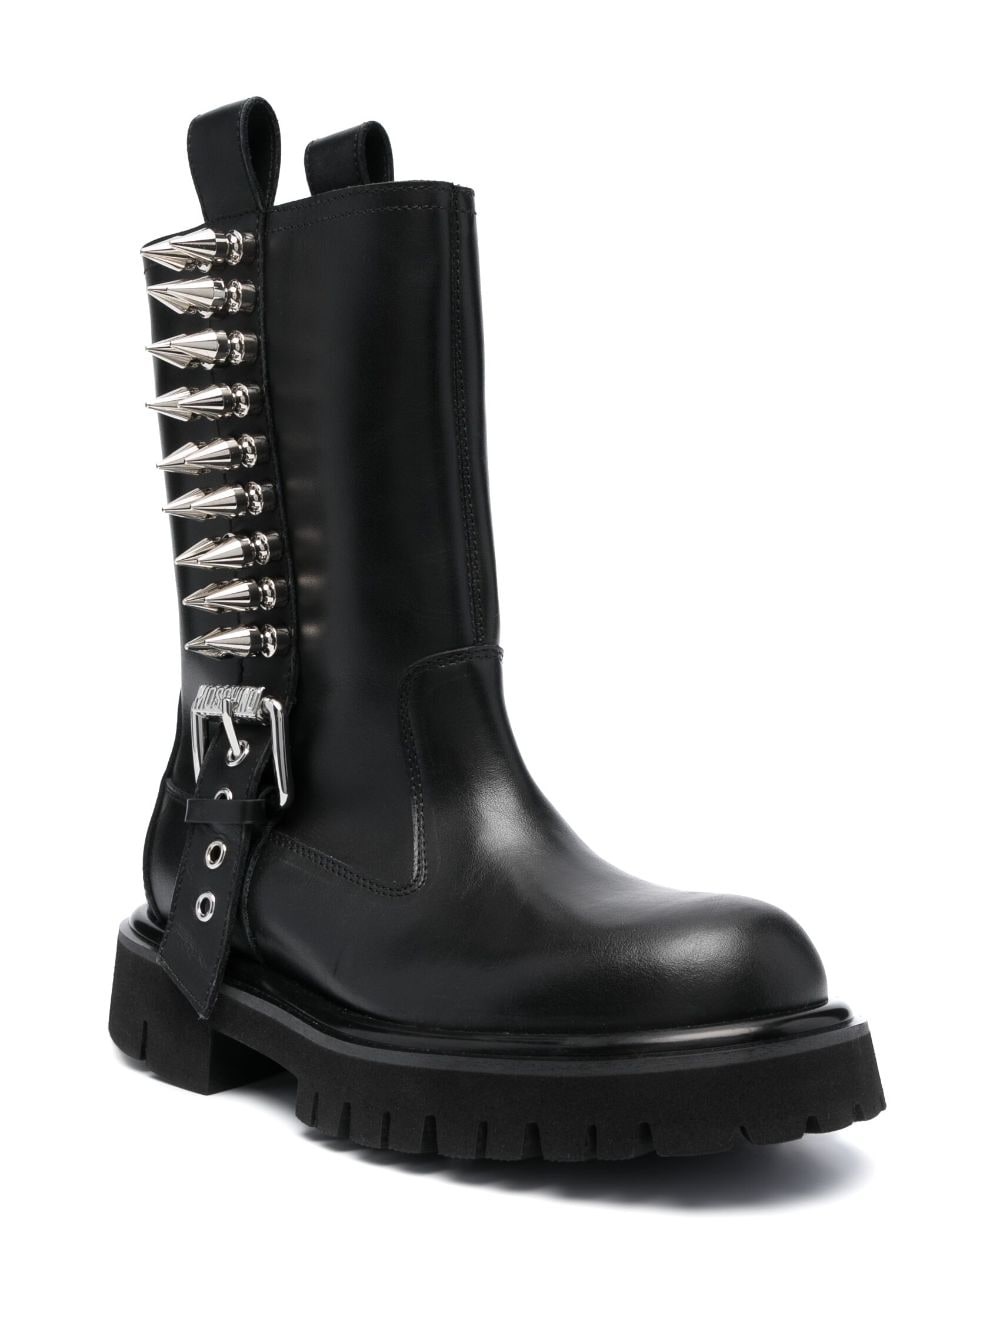 spike-embellished leather boots - 2